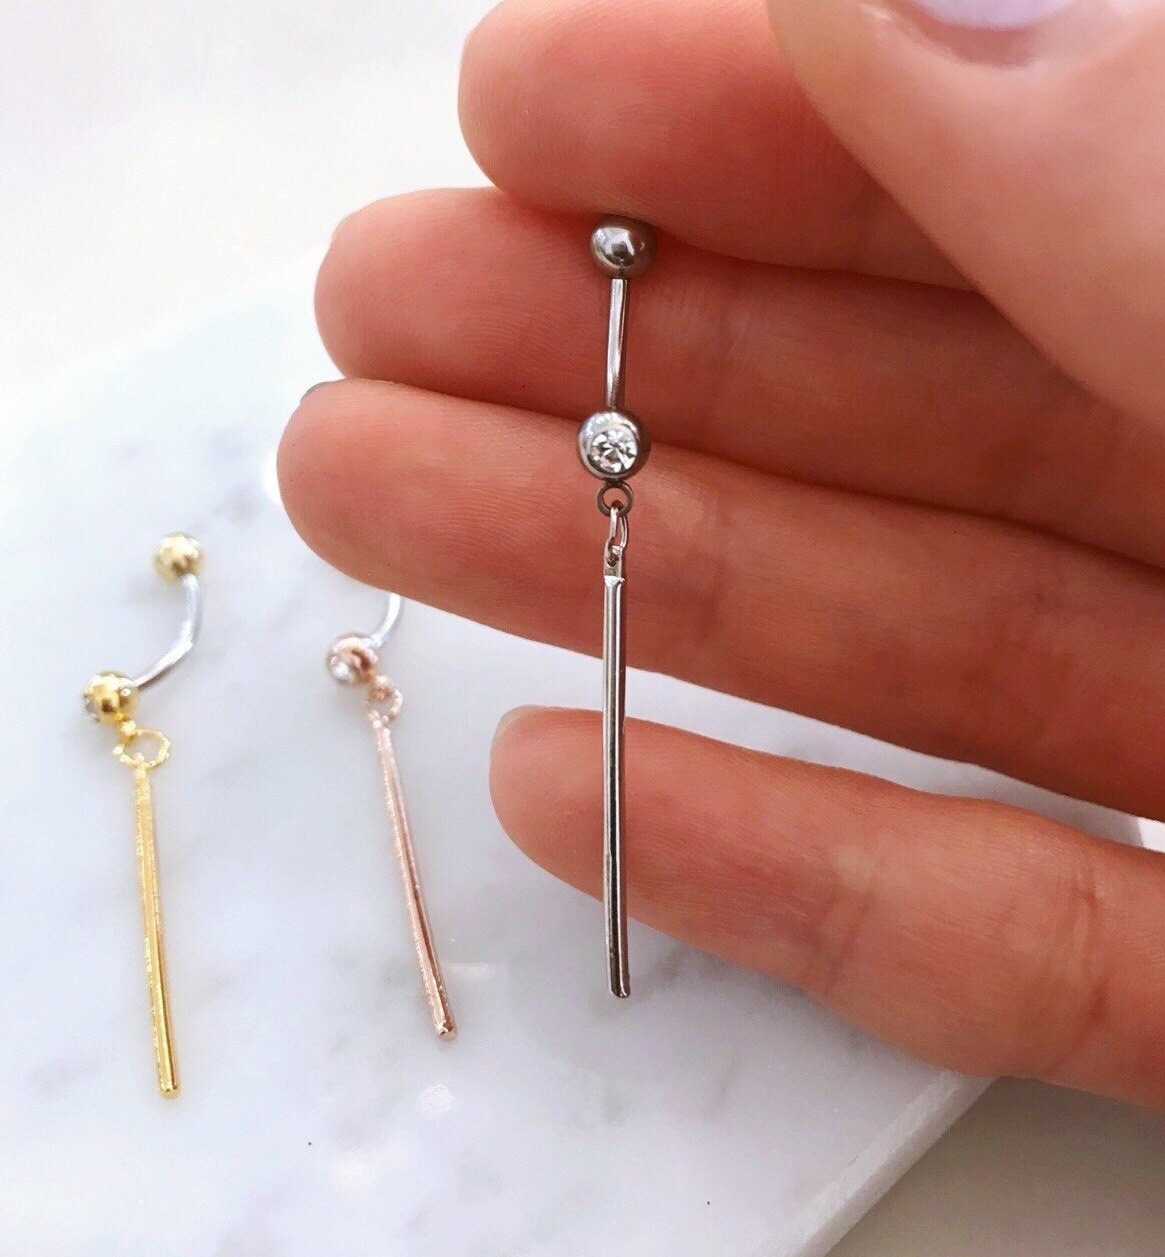 Details about   TT Gold-Tone CZ Flower Dangle Belly Bar Ring 4 Colour Body Piecing BL126 